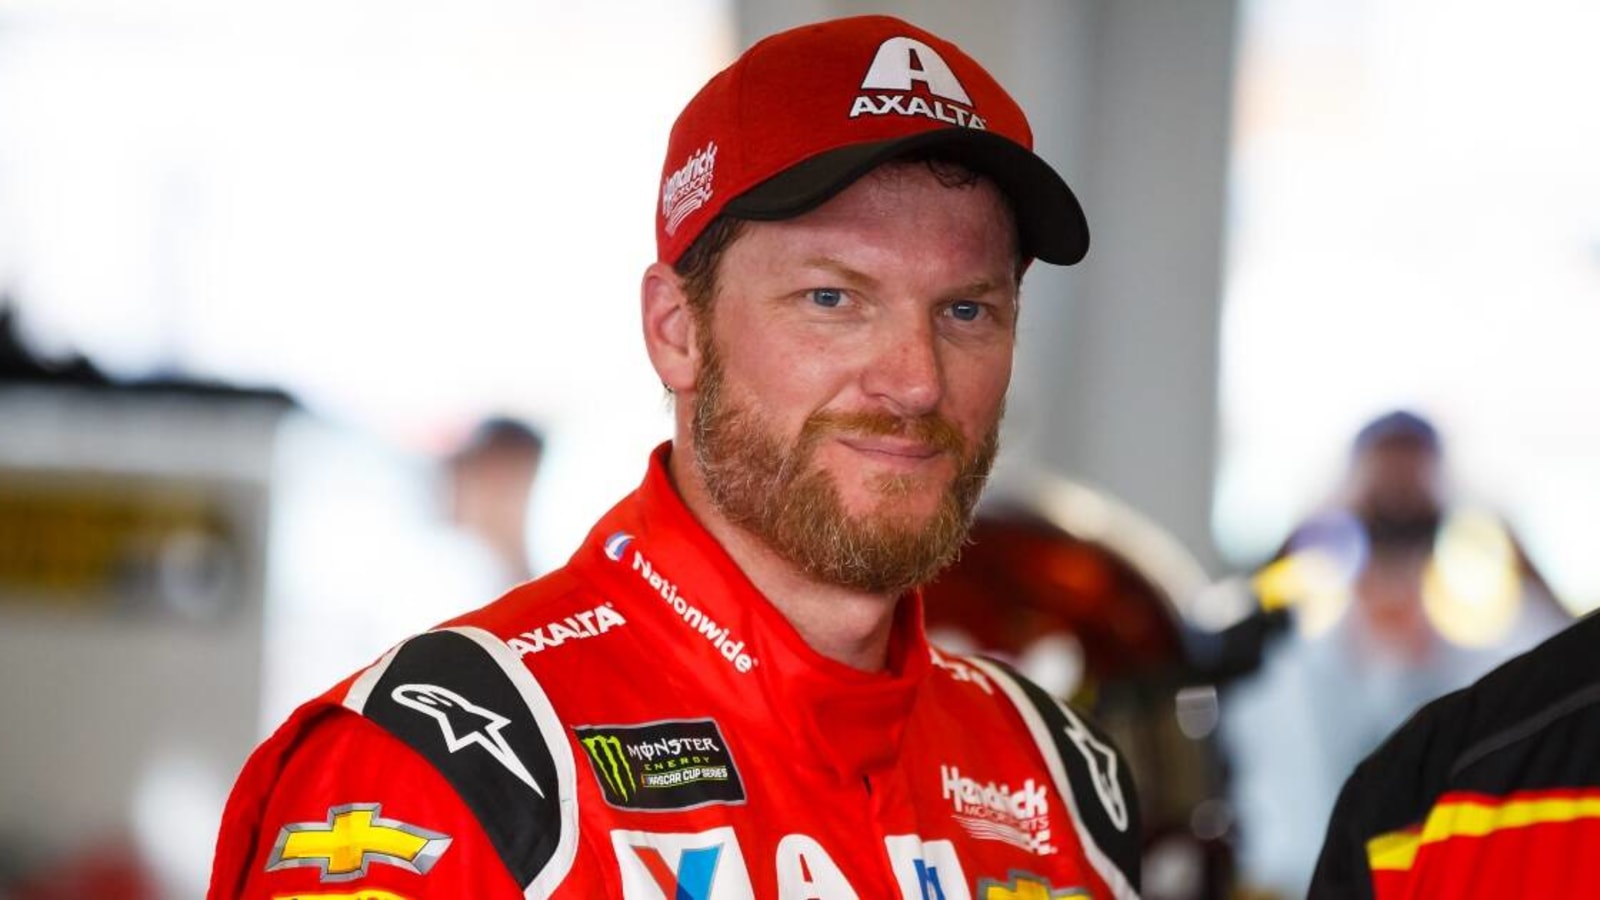 Dale Earnhardt Jr. sets the record straight about departure from NBC: ‘Promise that’s the truth’